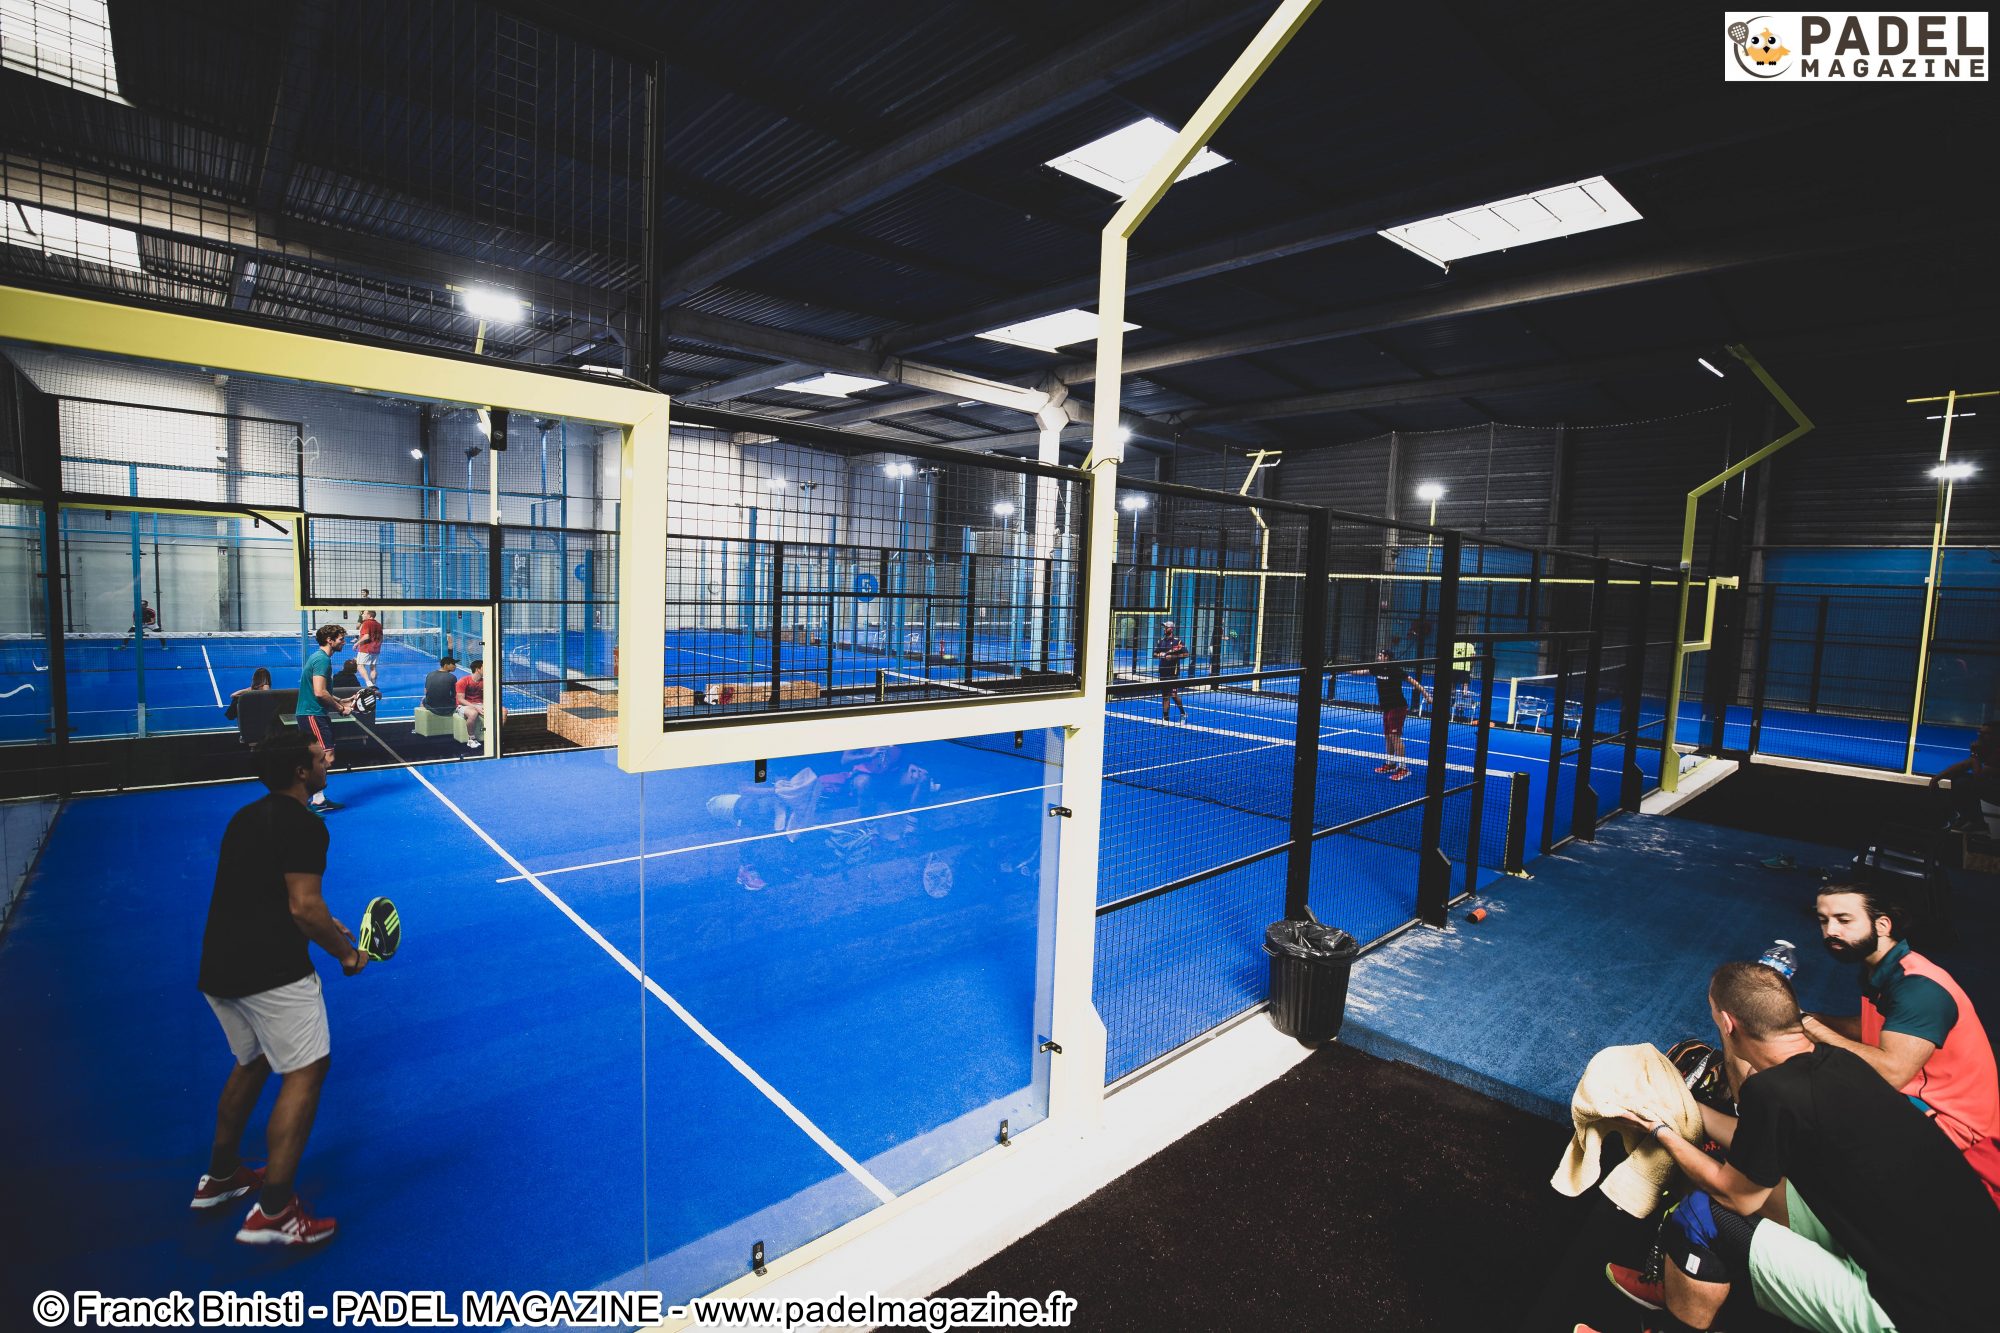 Christophe Michon: ”Wilson will invest in padel"